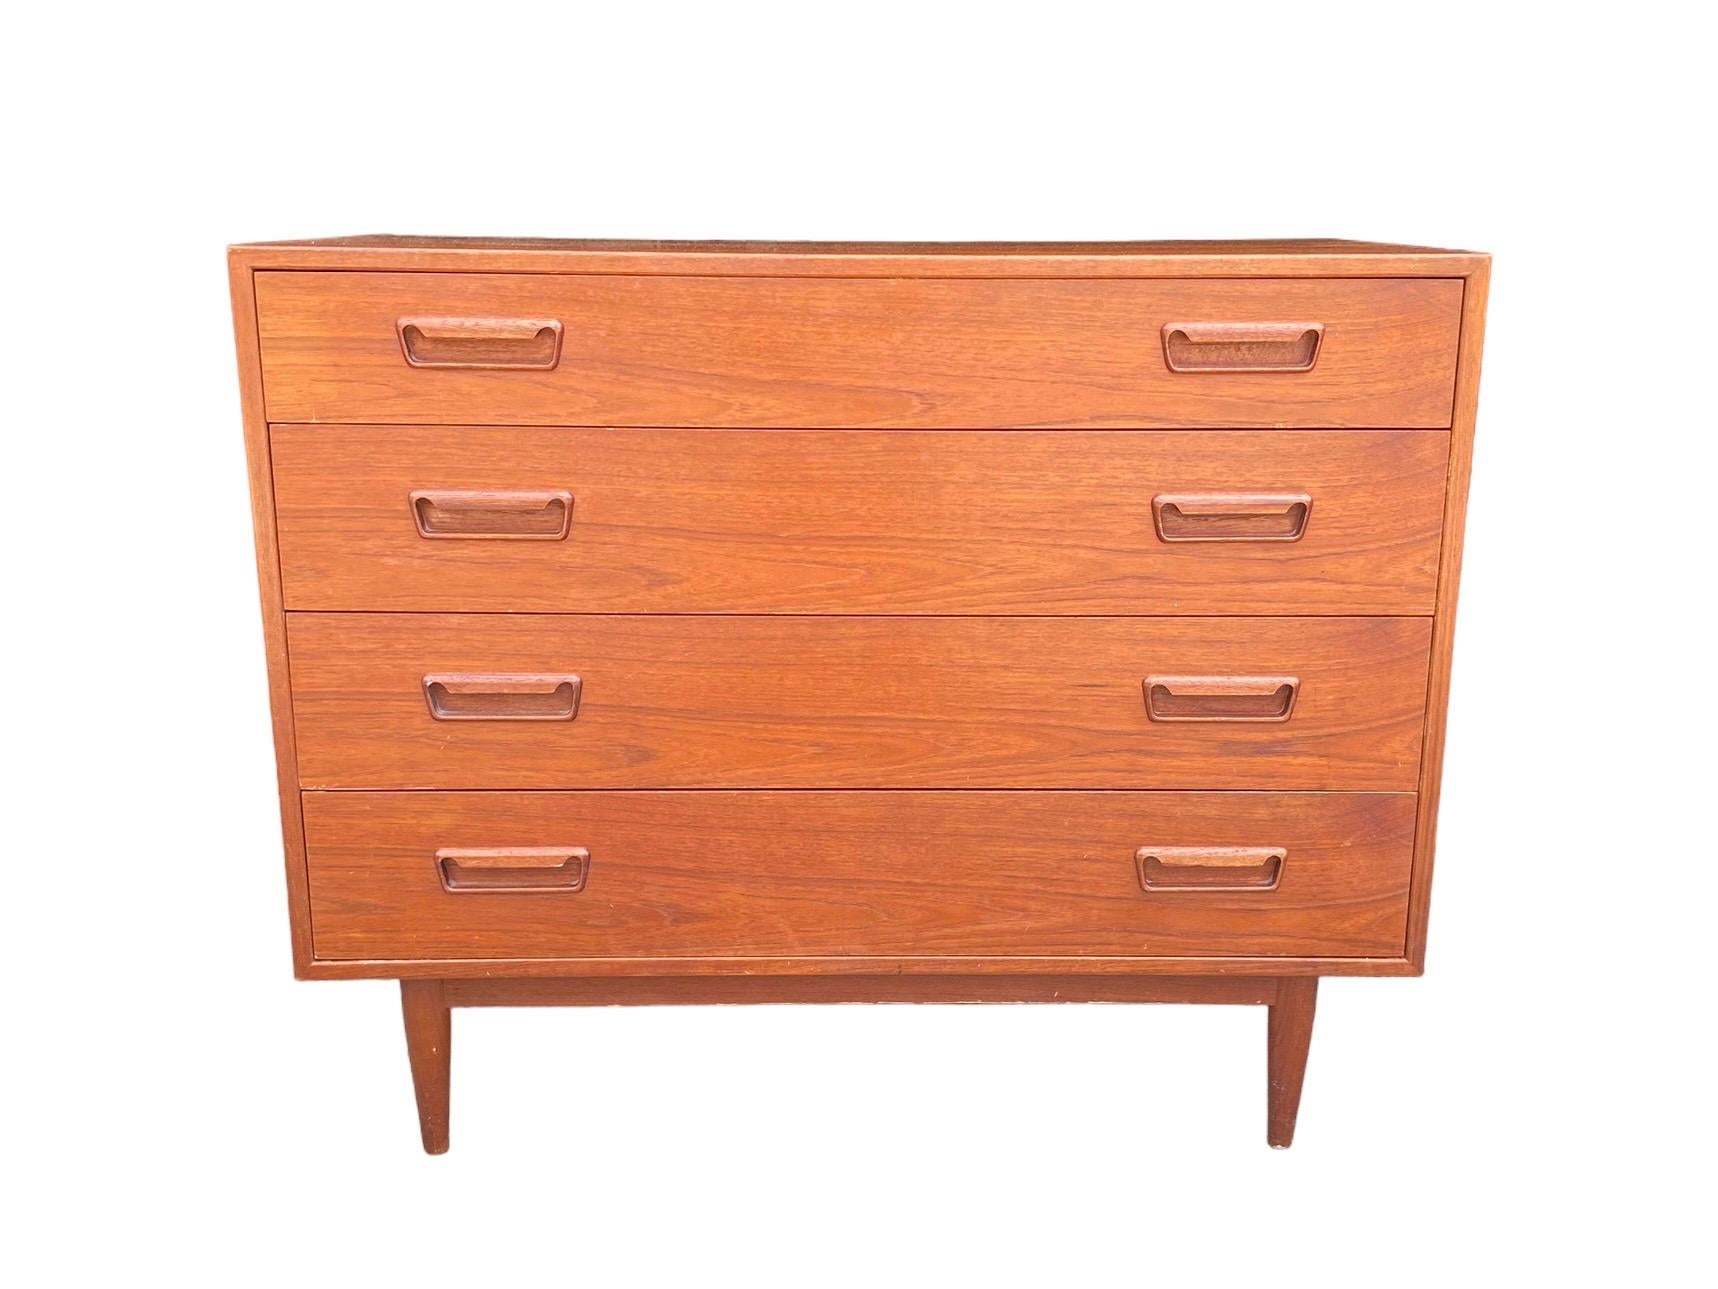 Excellent chest of drawers in teak wood with decorative angled pulls. Stamped Made in Norway. In the style of Arne Vodder. Stunning grain throughout the piece including the finished back panel. All four drawers pull and slide with ease. 